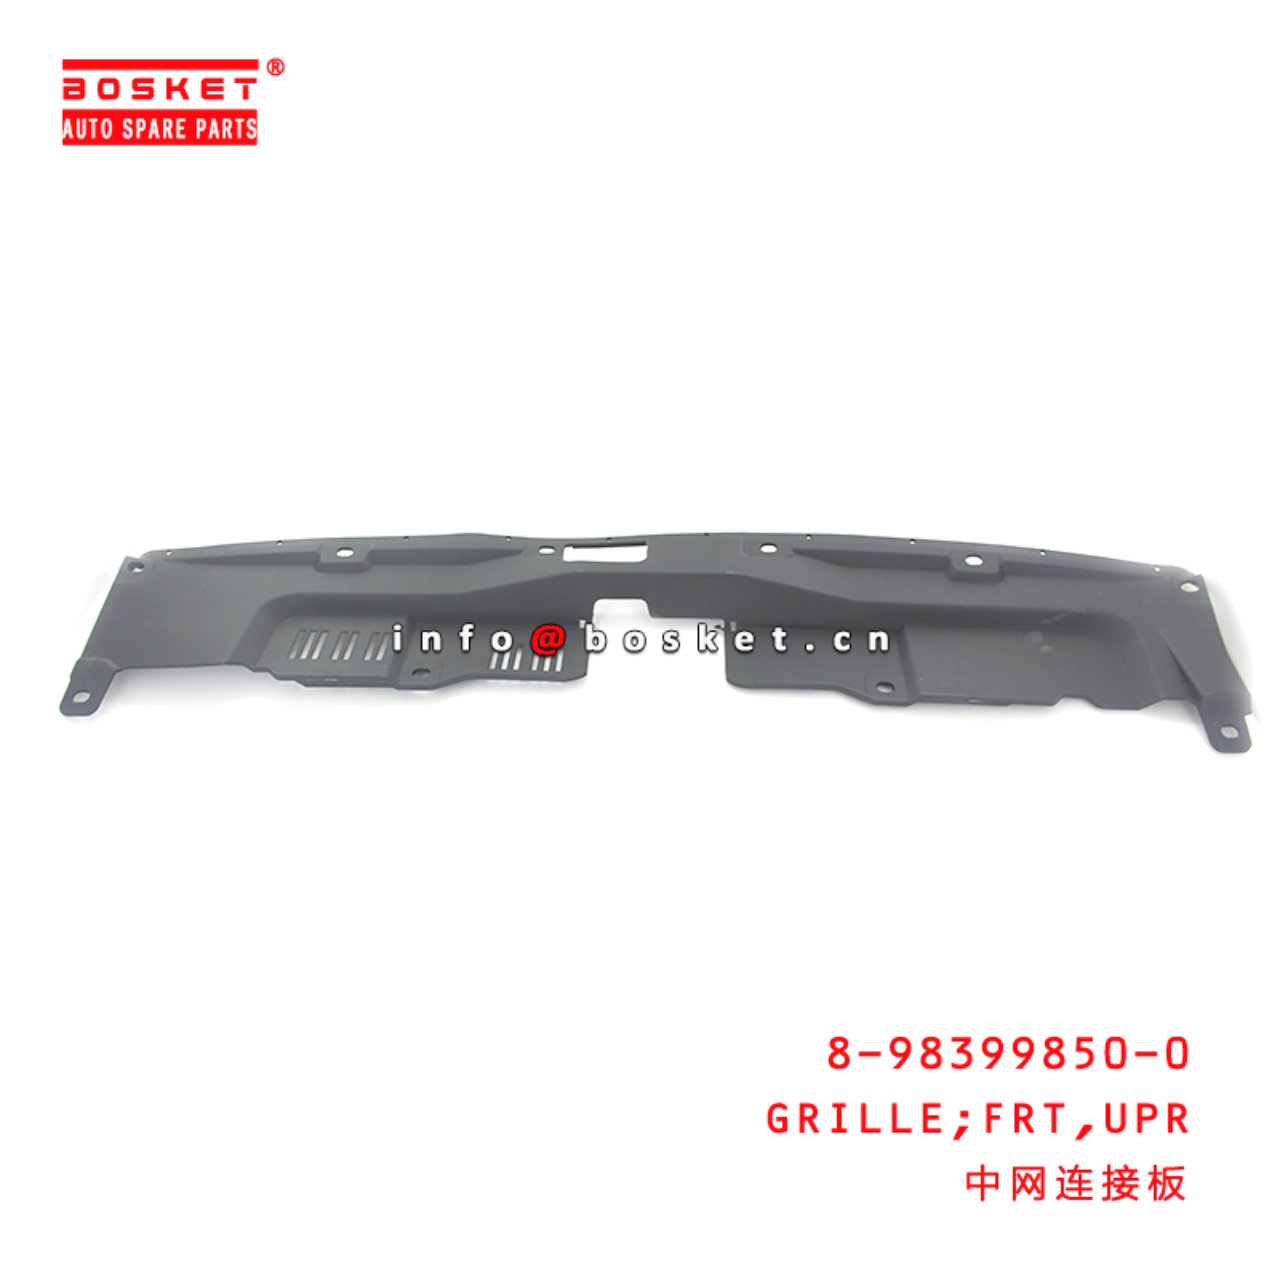 8-98399850-0 Upper Front Grille Suitable for ISUZU DMAX 8983998500